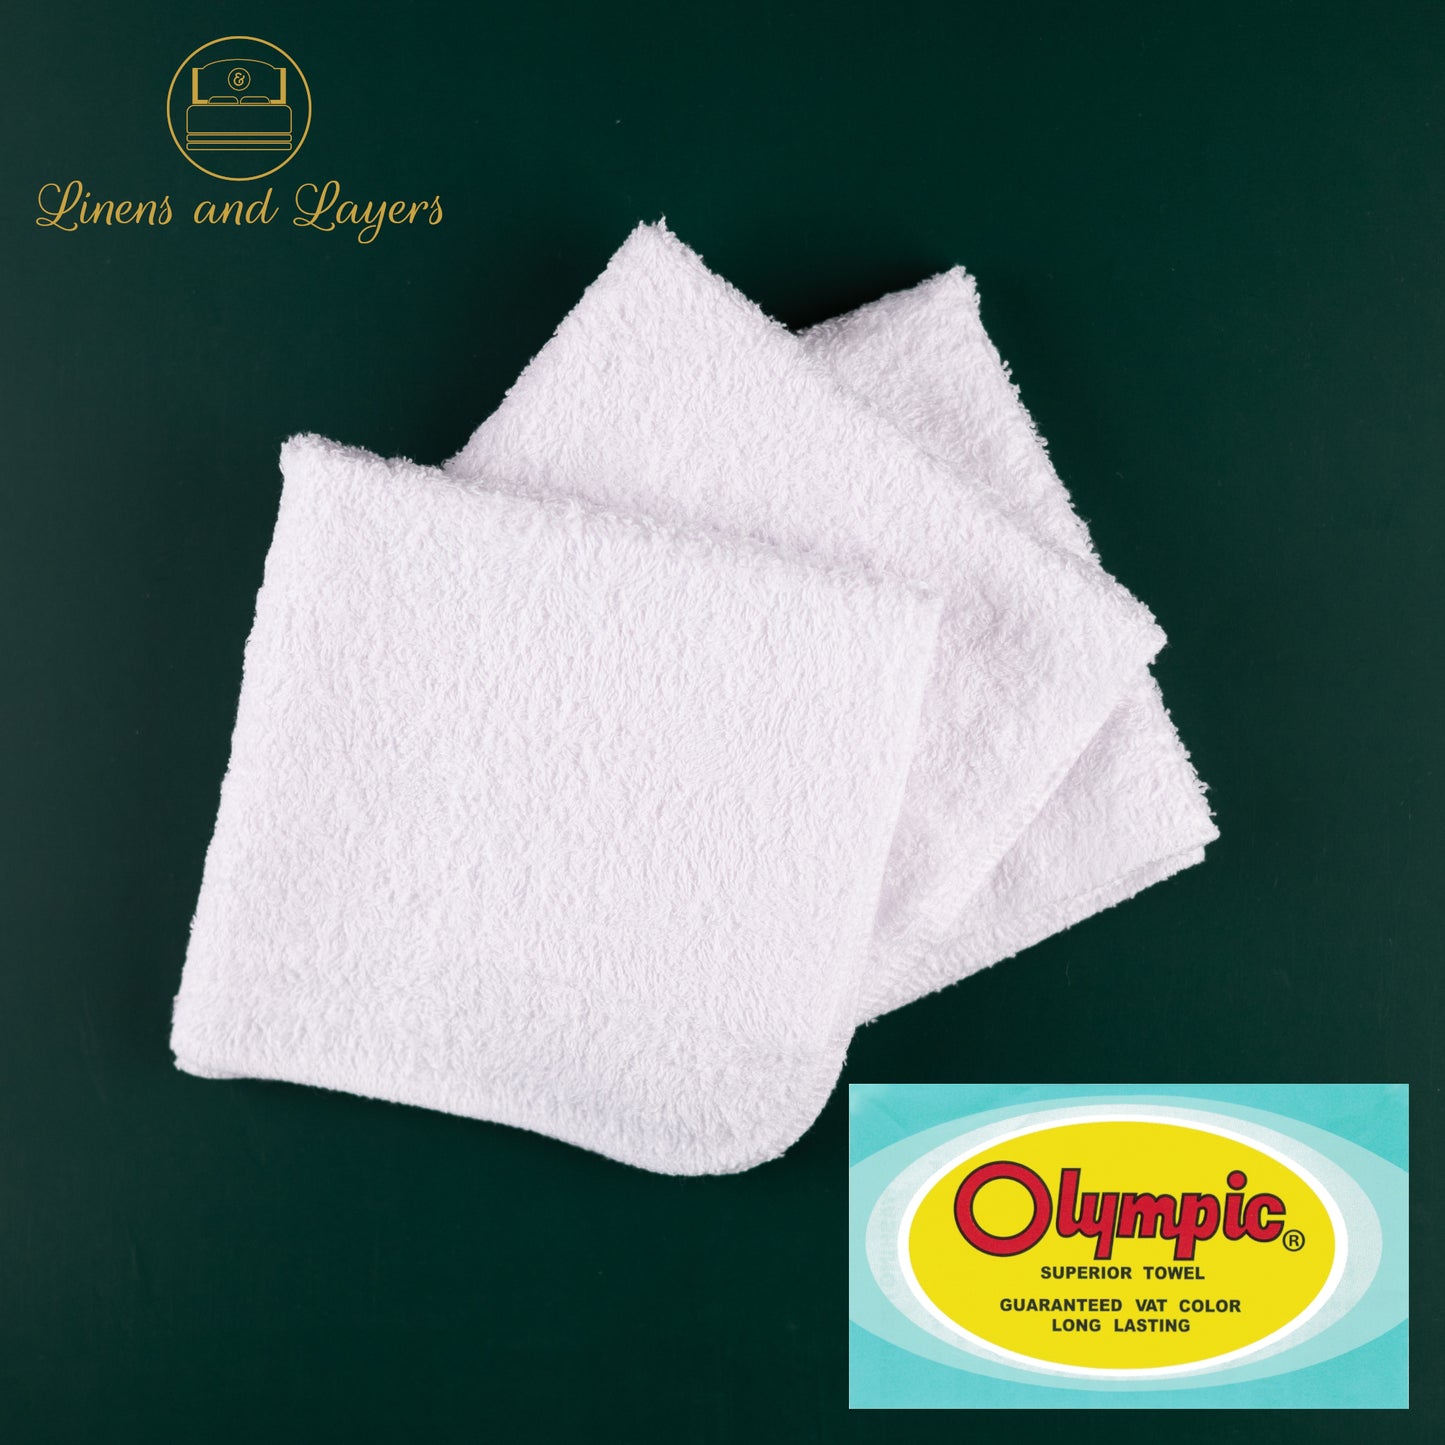 Olympic White Face Towel (448 GSM) - DK-1111 (11x11 inches)